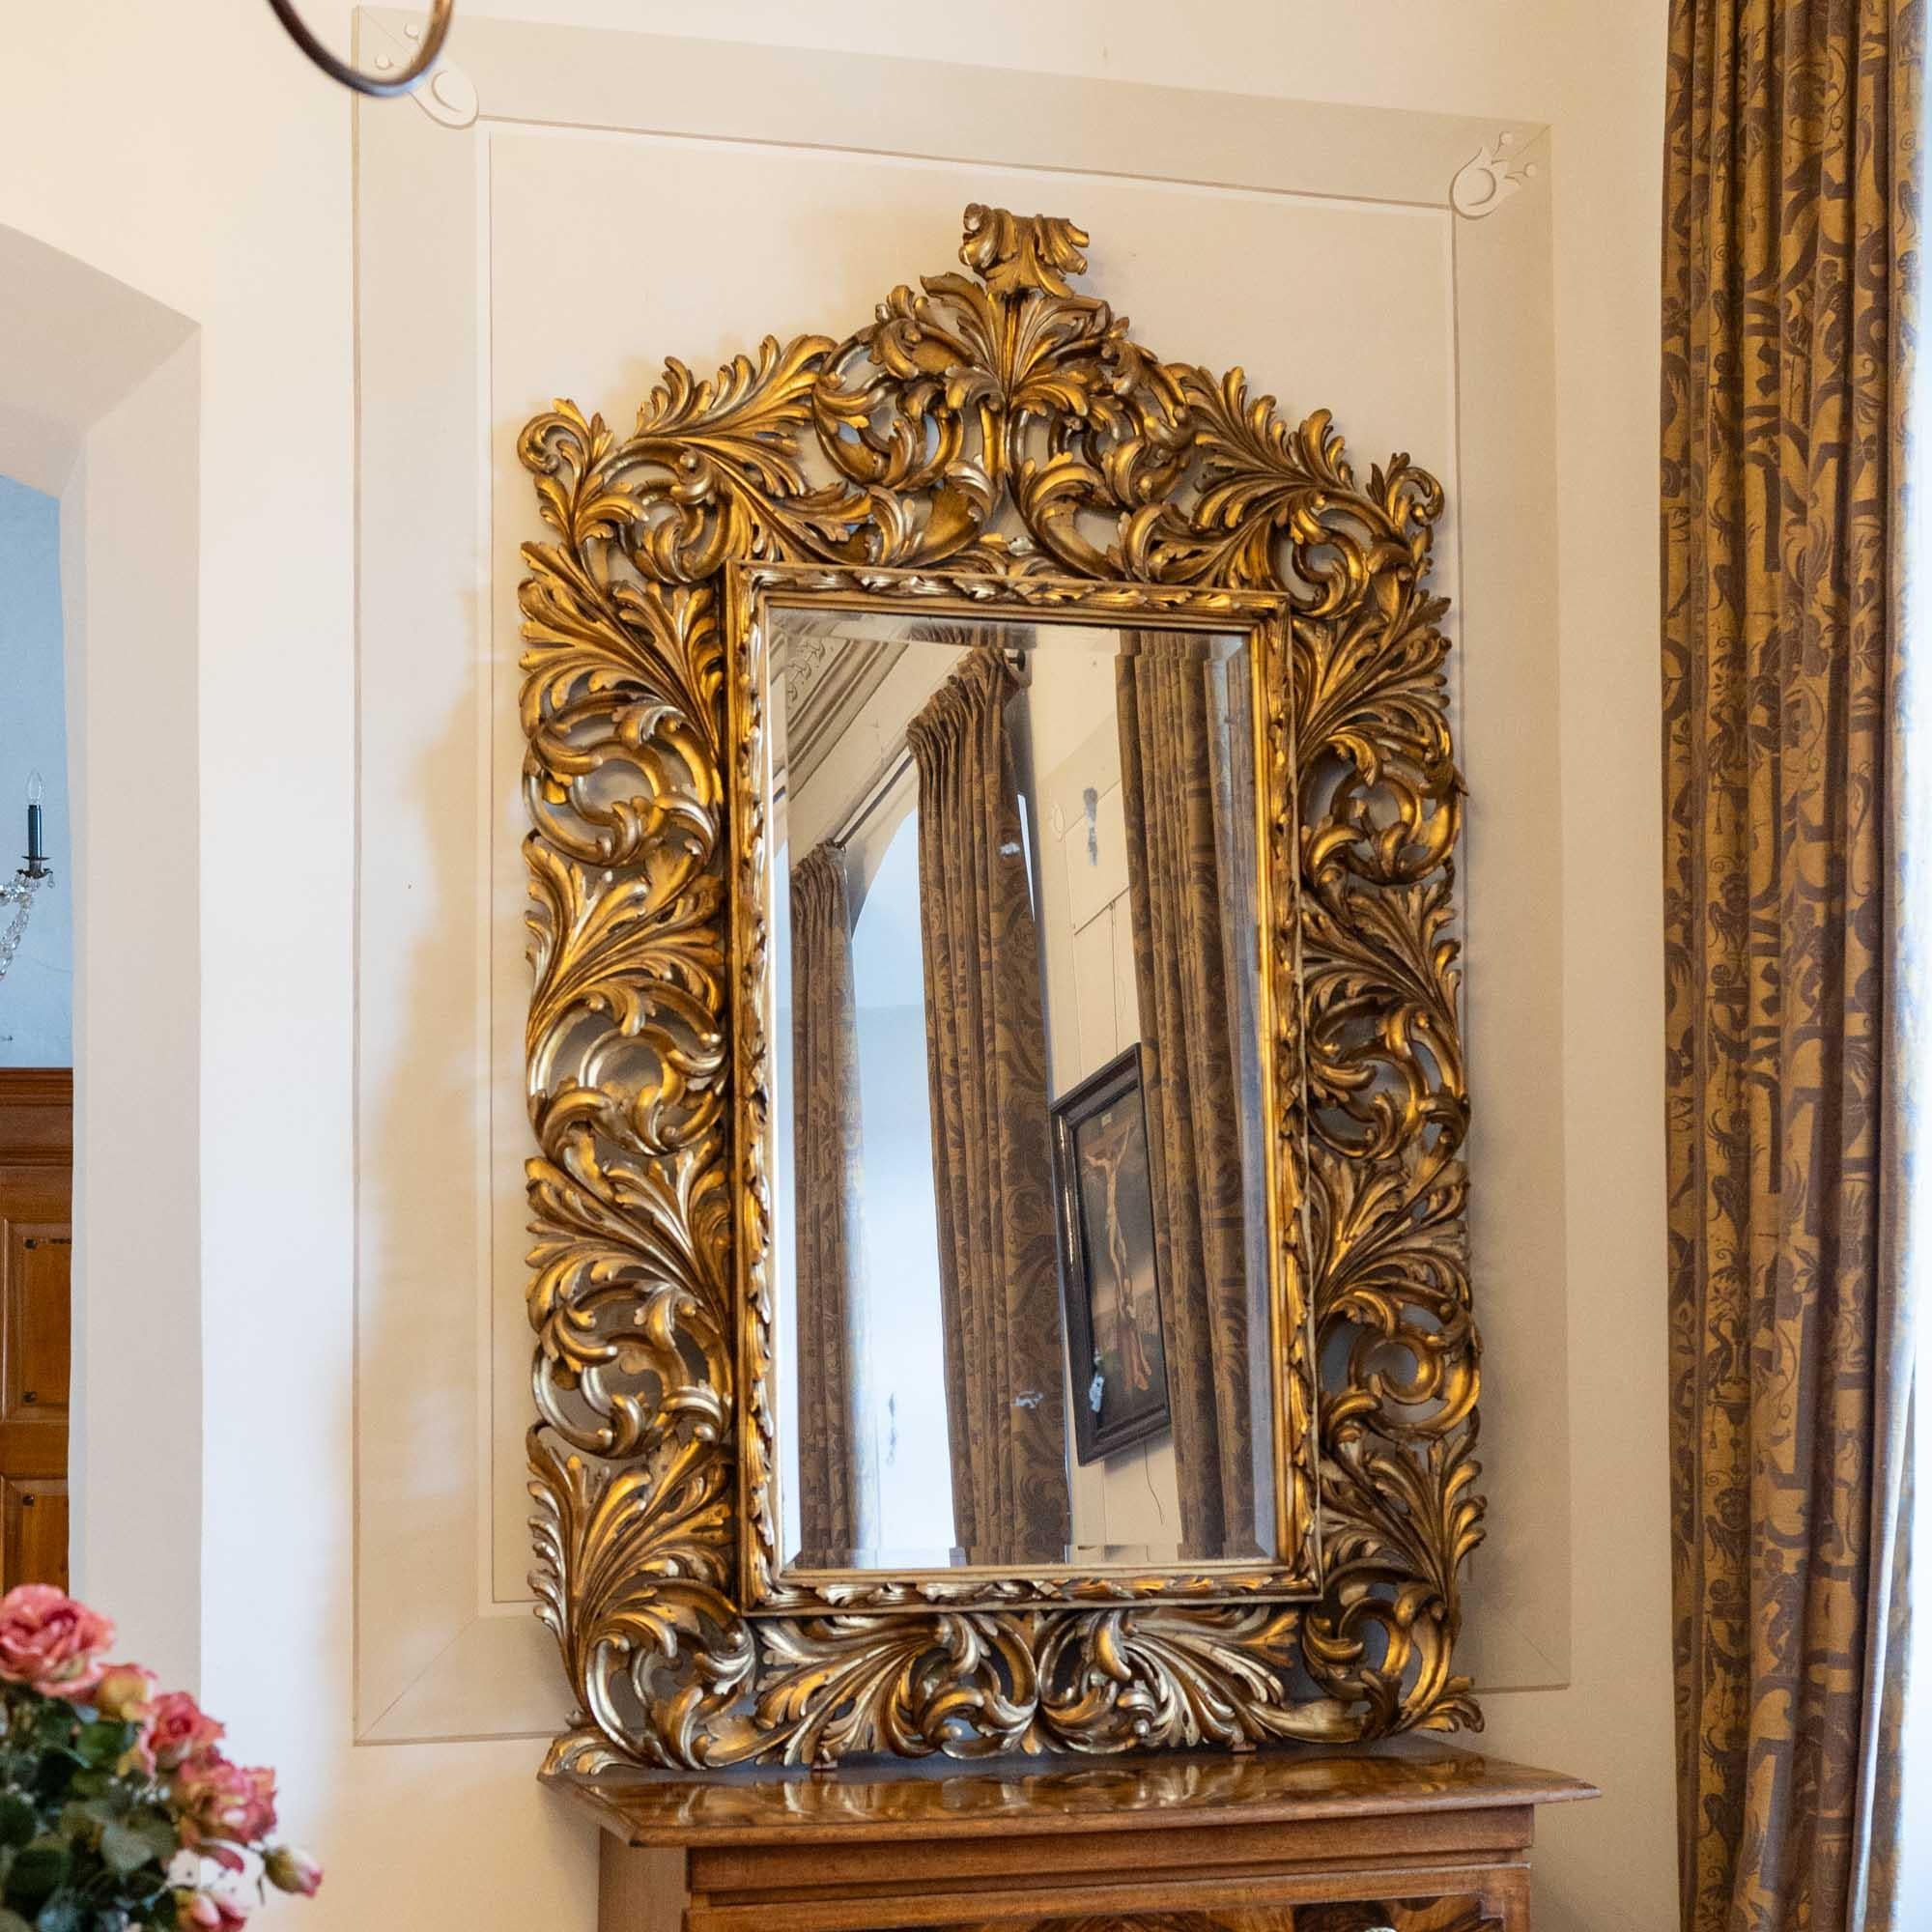 Large Florentine wall mirror with old, partly blind mirror glass. The wall mirror is surrounded by a large, giltwood frame in the form of openwork tendrils or leaf ornaments.